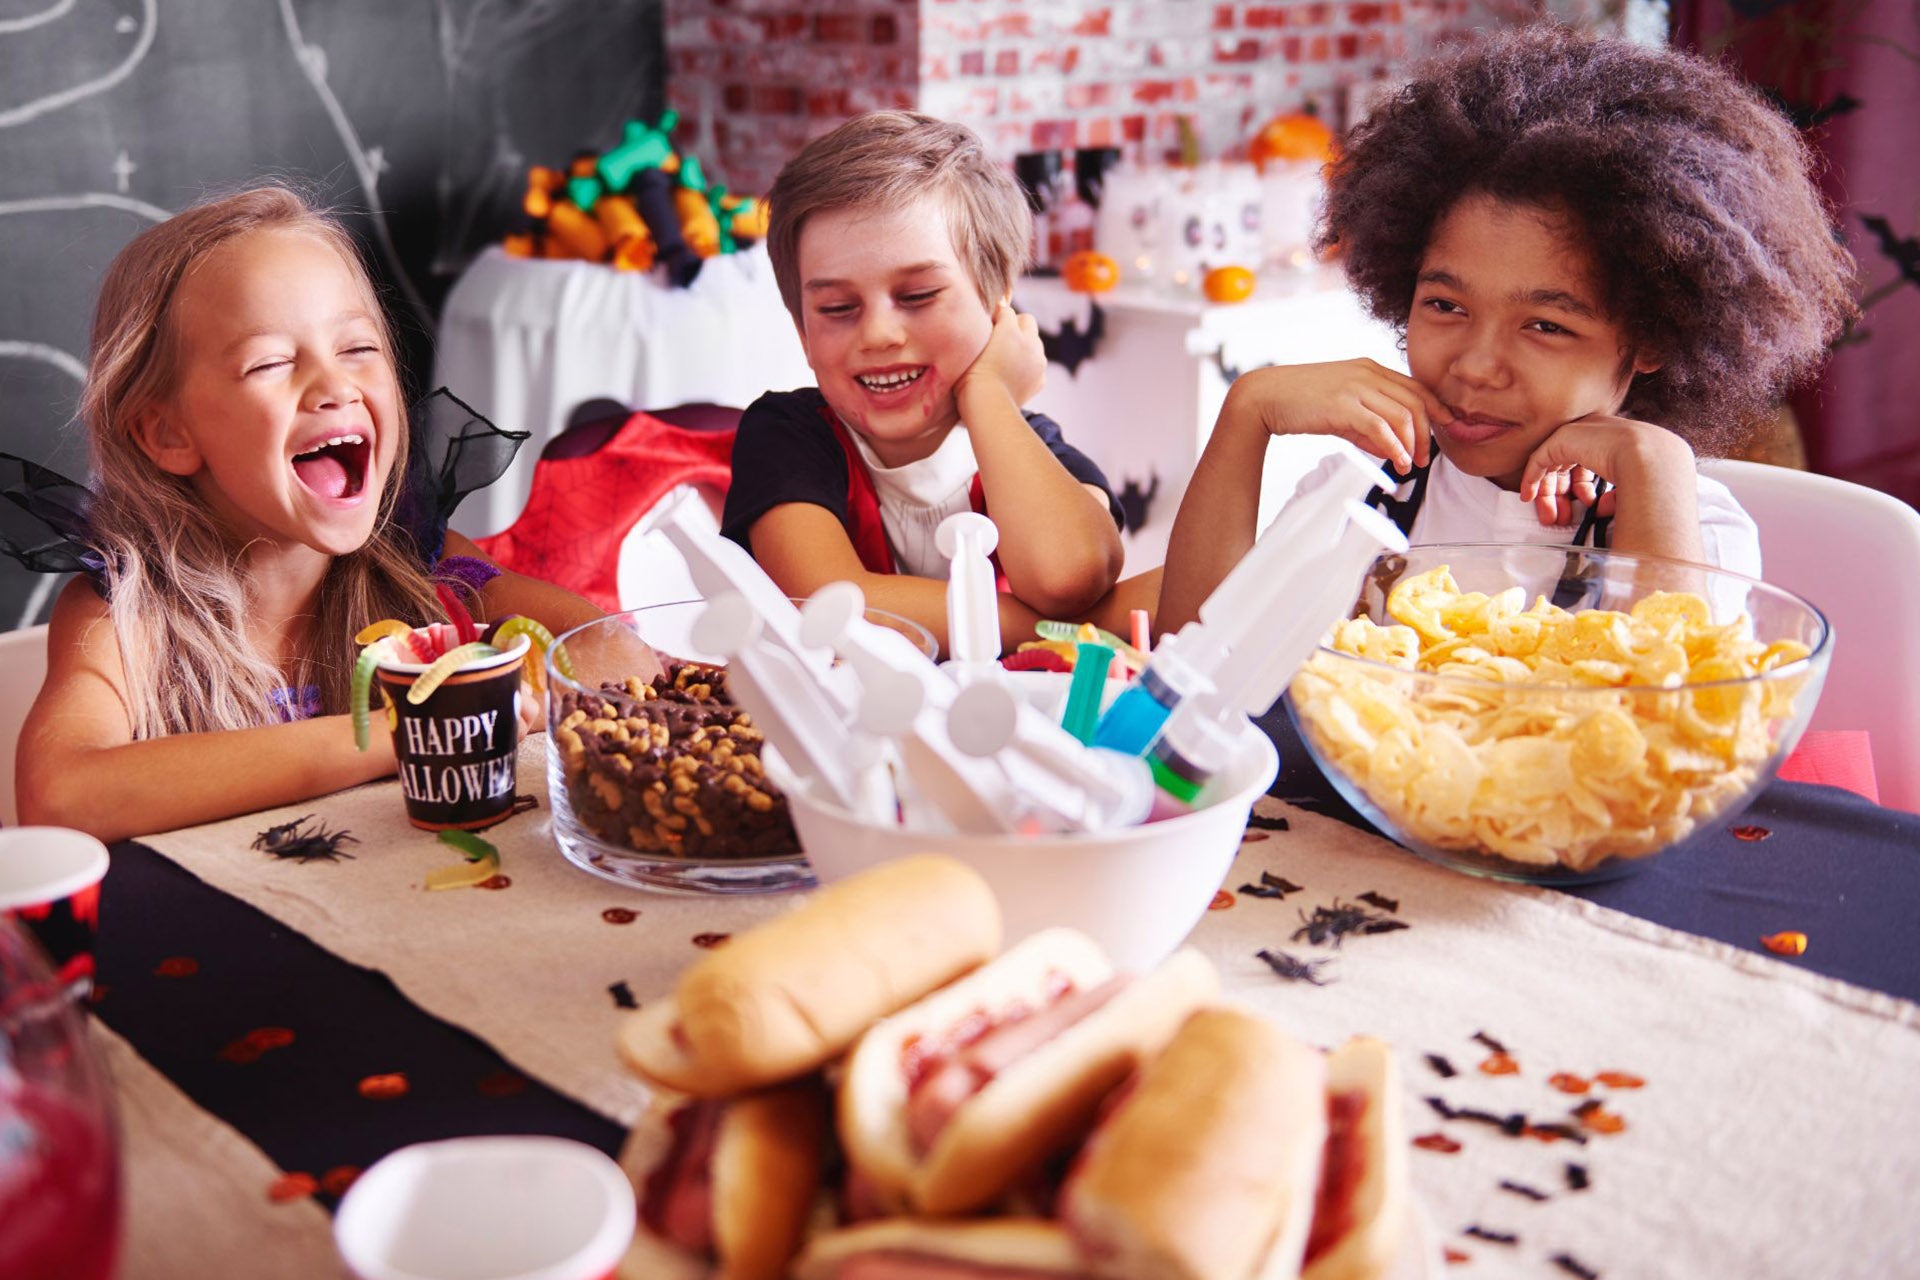 Three children laughing while enjoying Halloween candy at a festive snack table